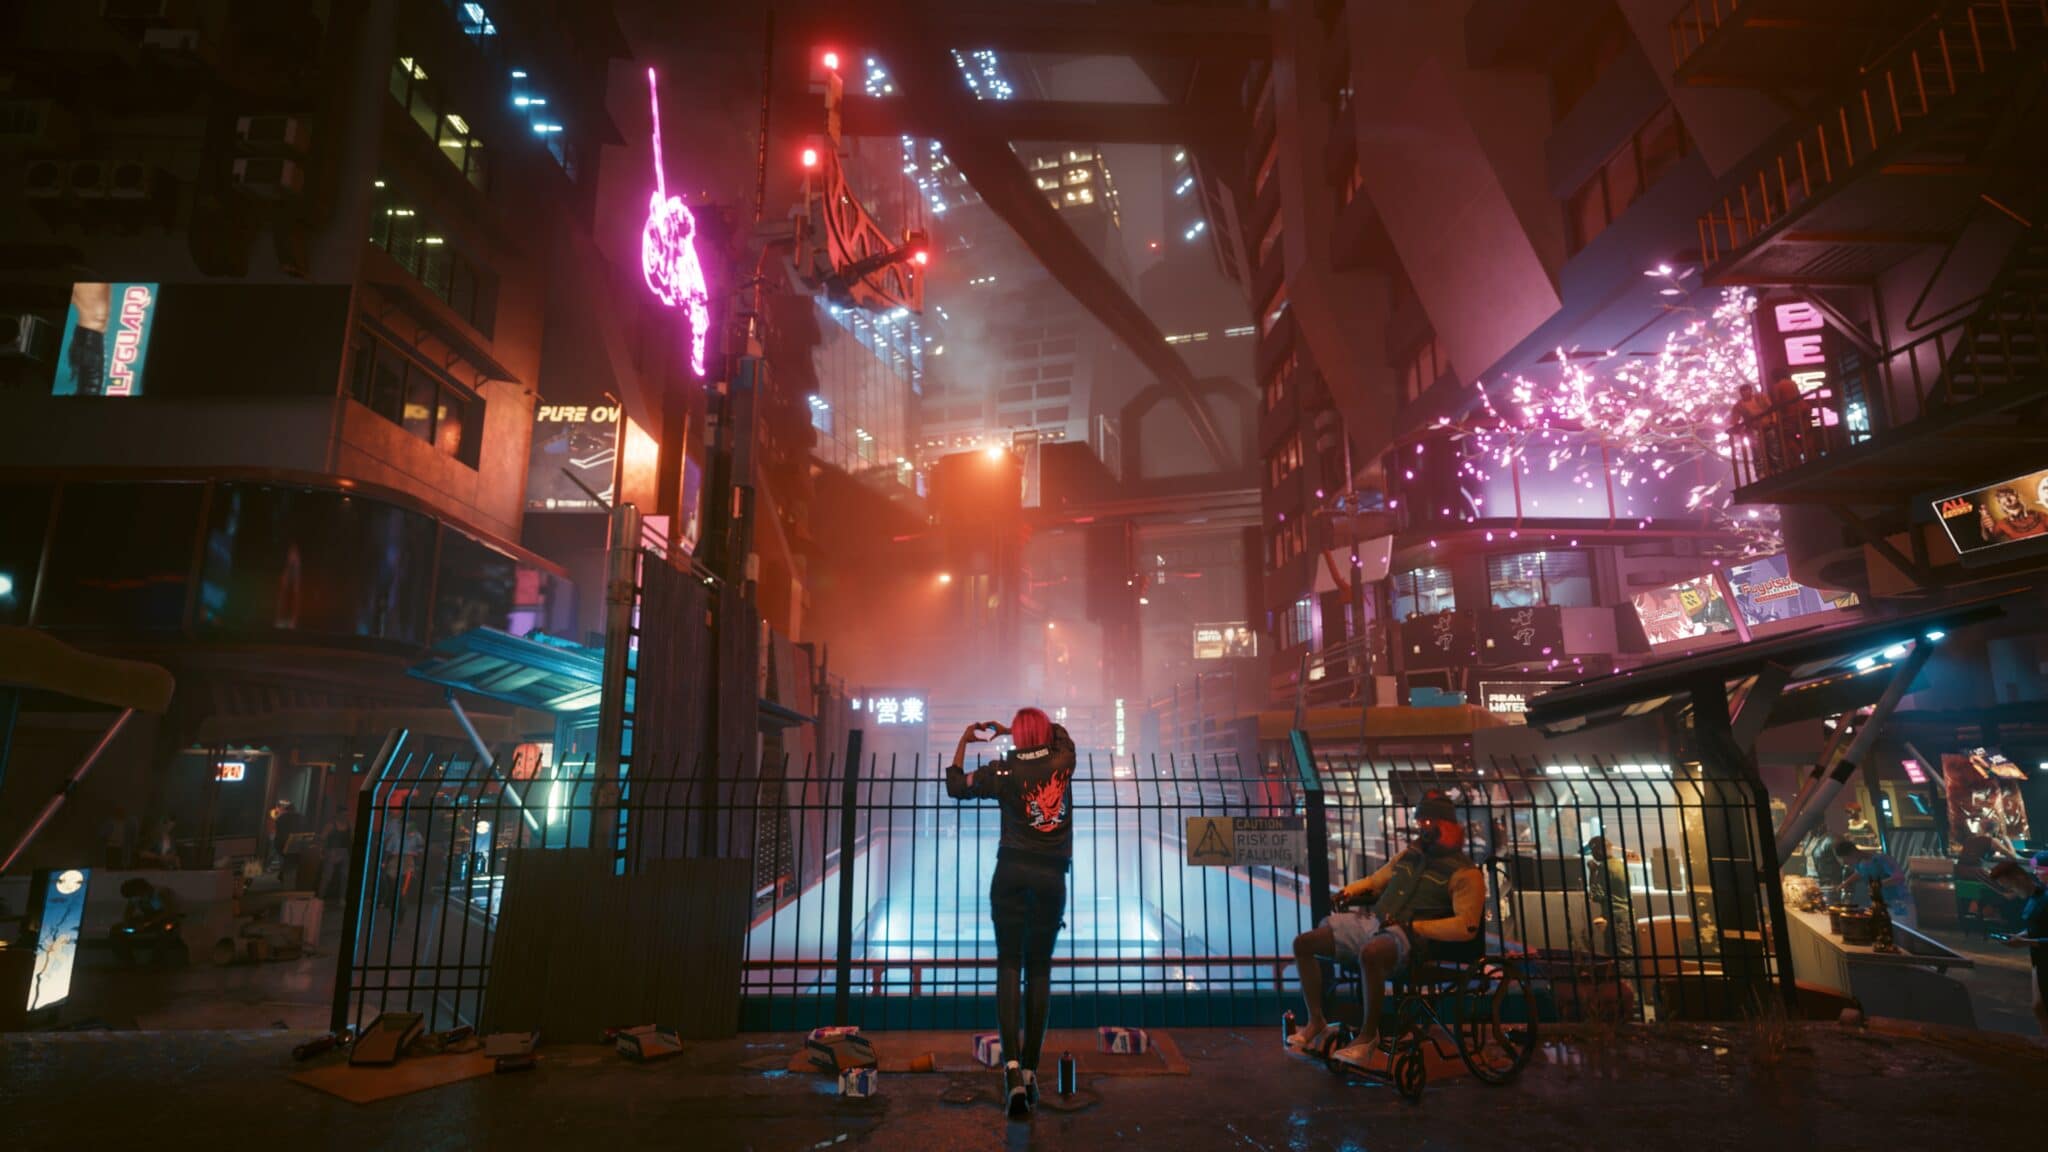 Cyberpunk 2077 is repeatedly criticised with corresponding ups and downs in its Steam reviews.